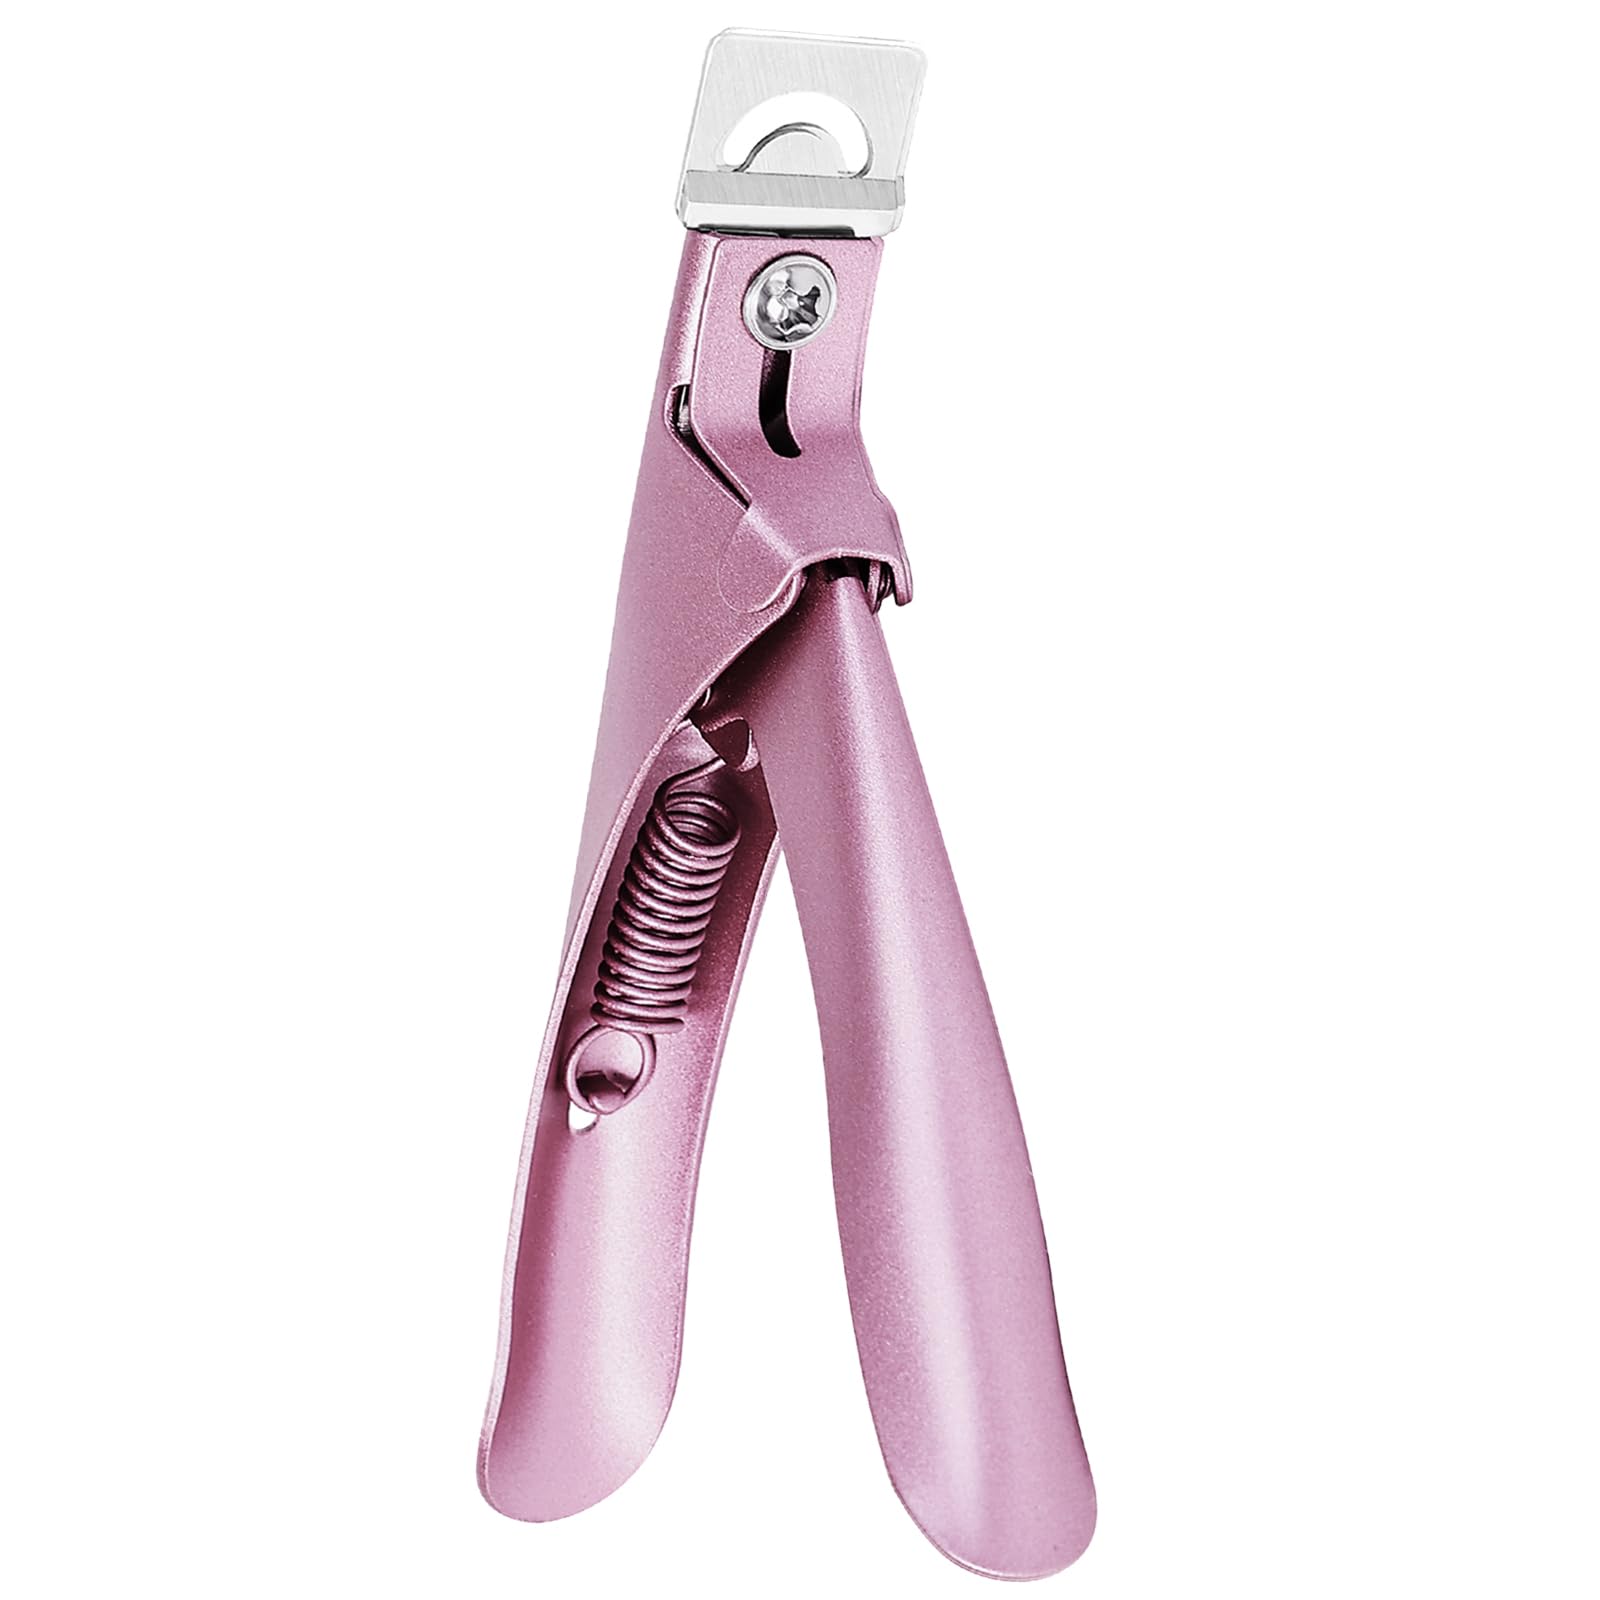 Stainless Steel Edge Cutter - Pink